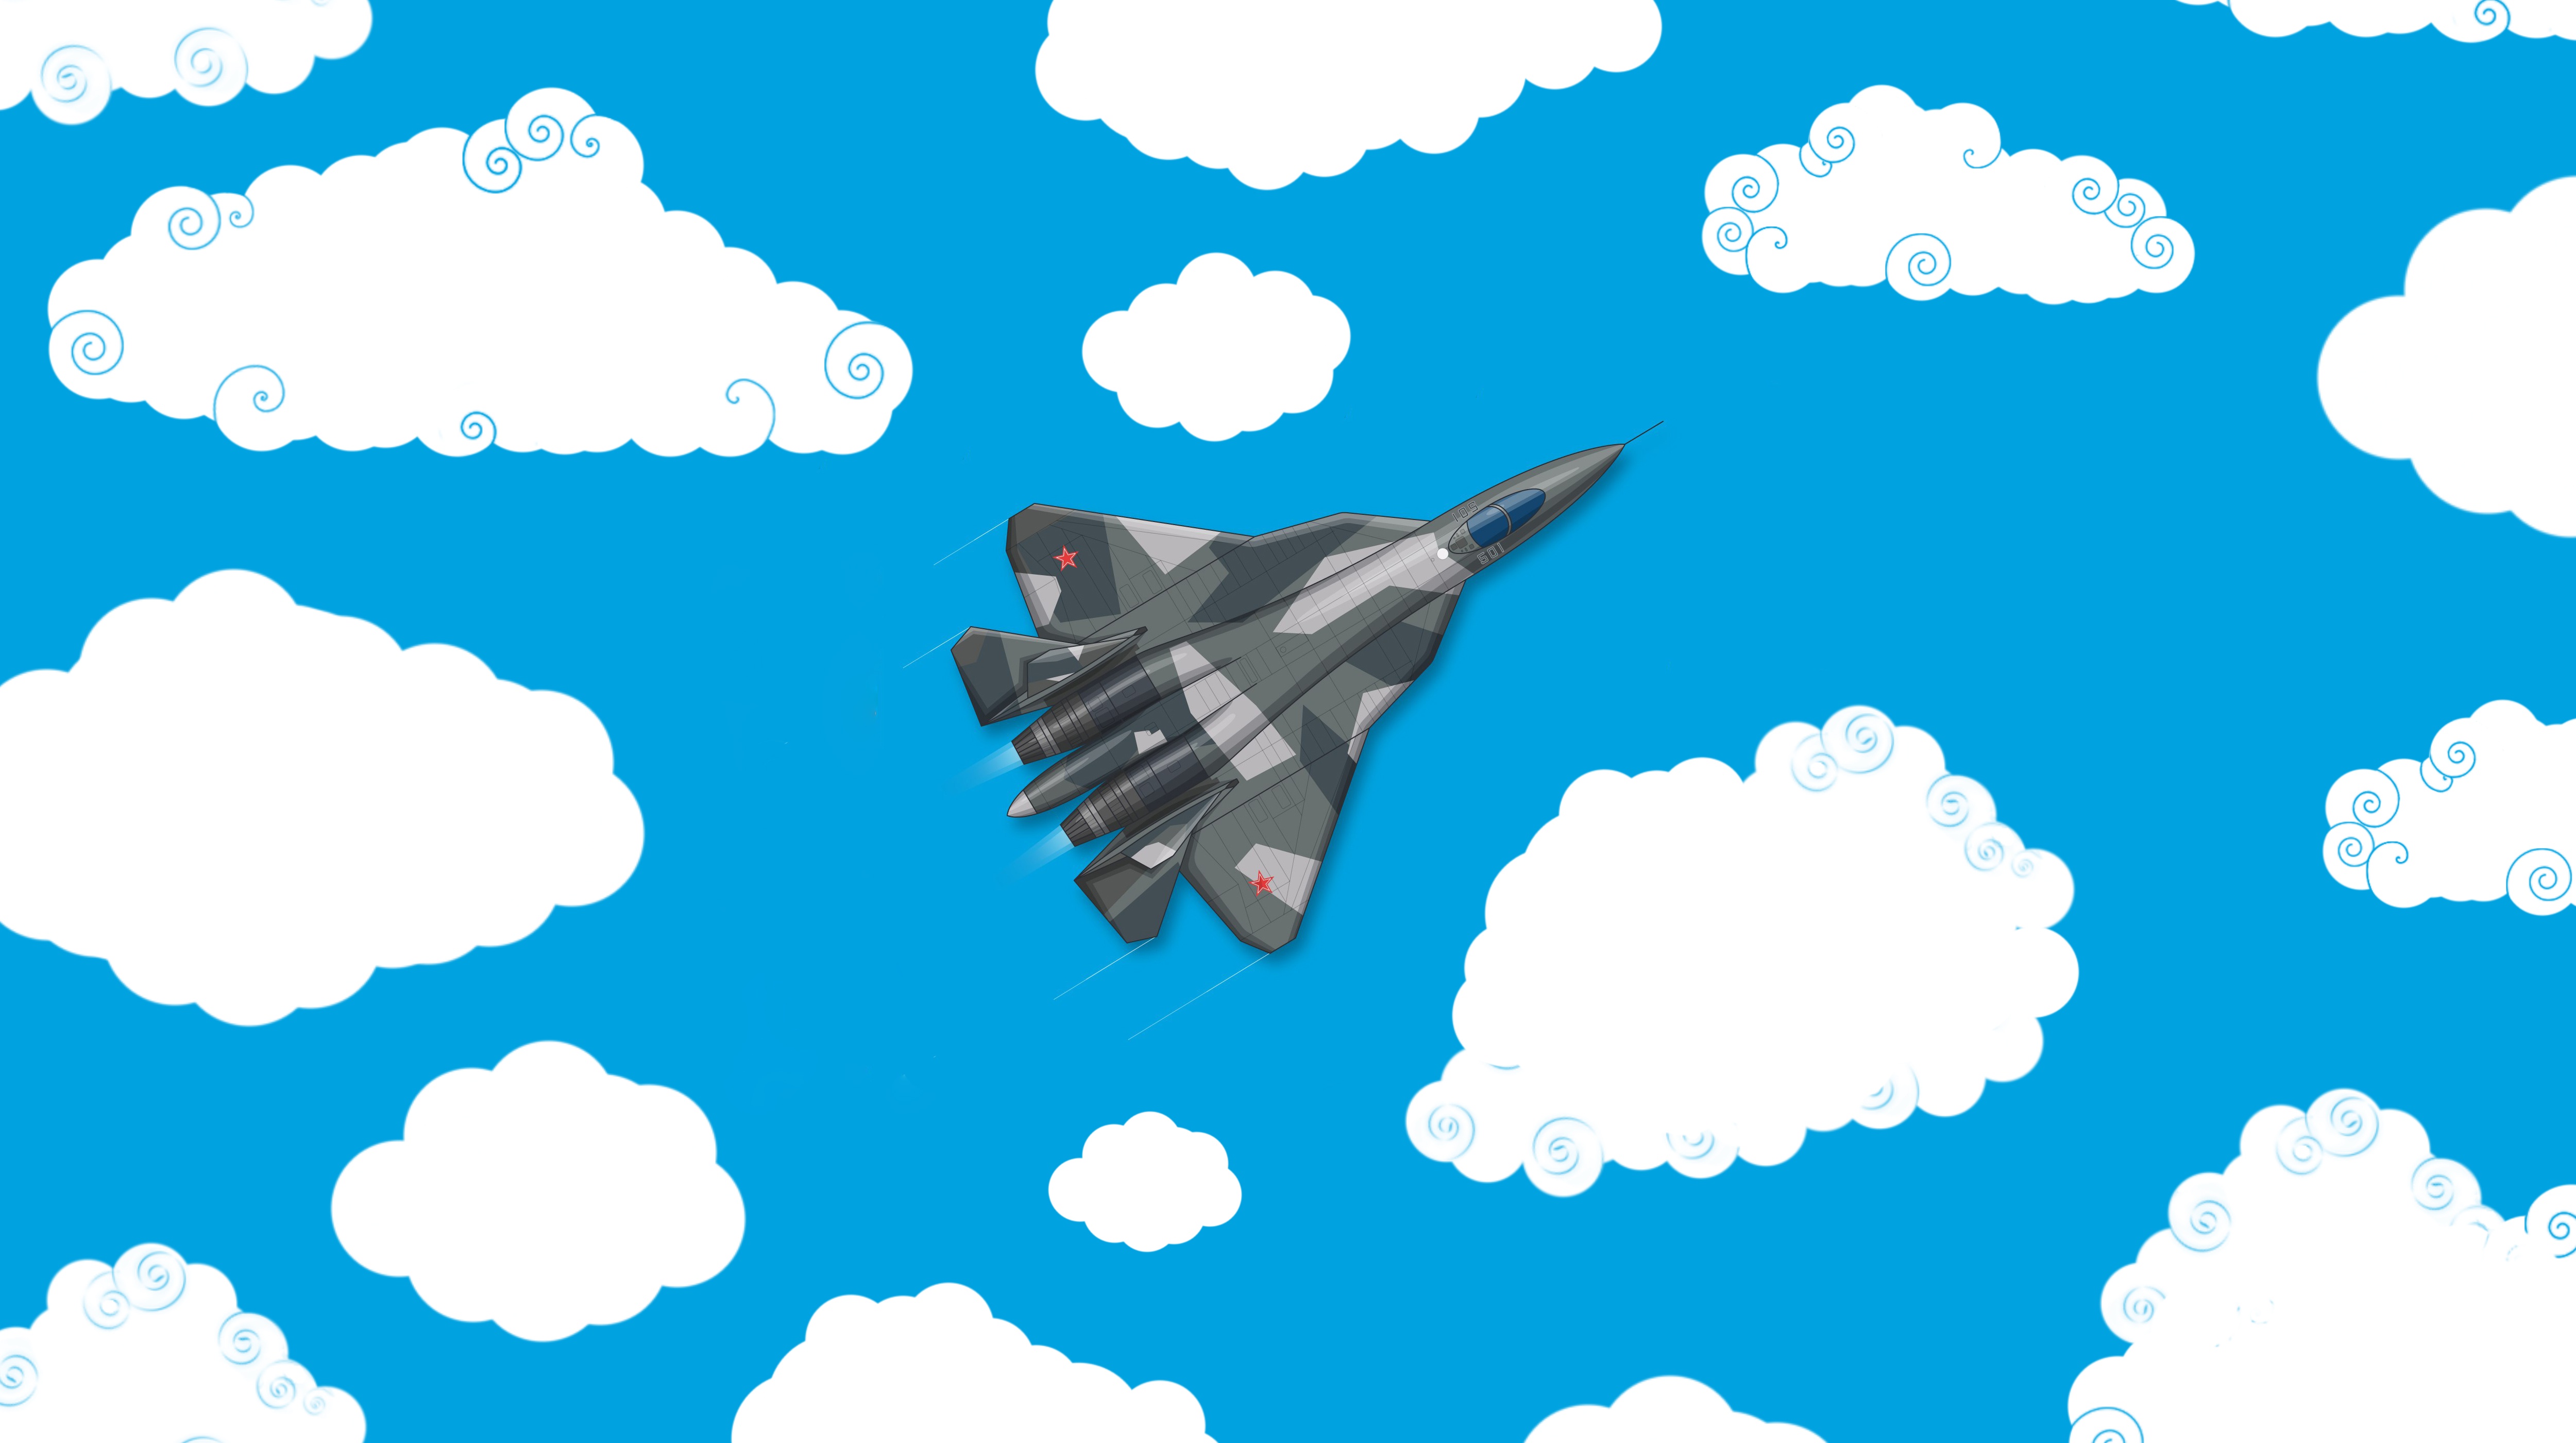 General 5000x2800 artwork aircraft military aircraft vehicle military Sukhoi Su-57 jet fighter military vehicle simple background airplane clouds sky